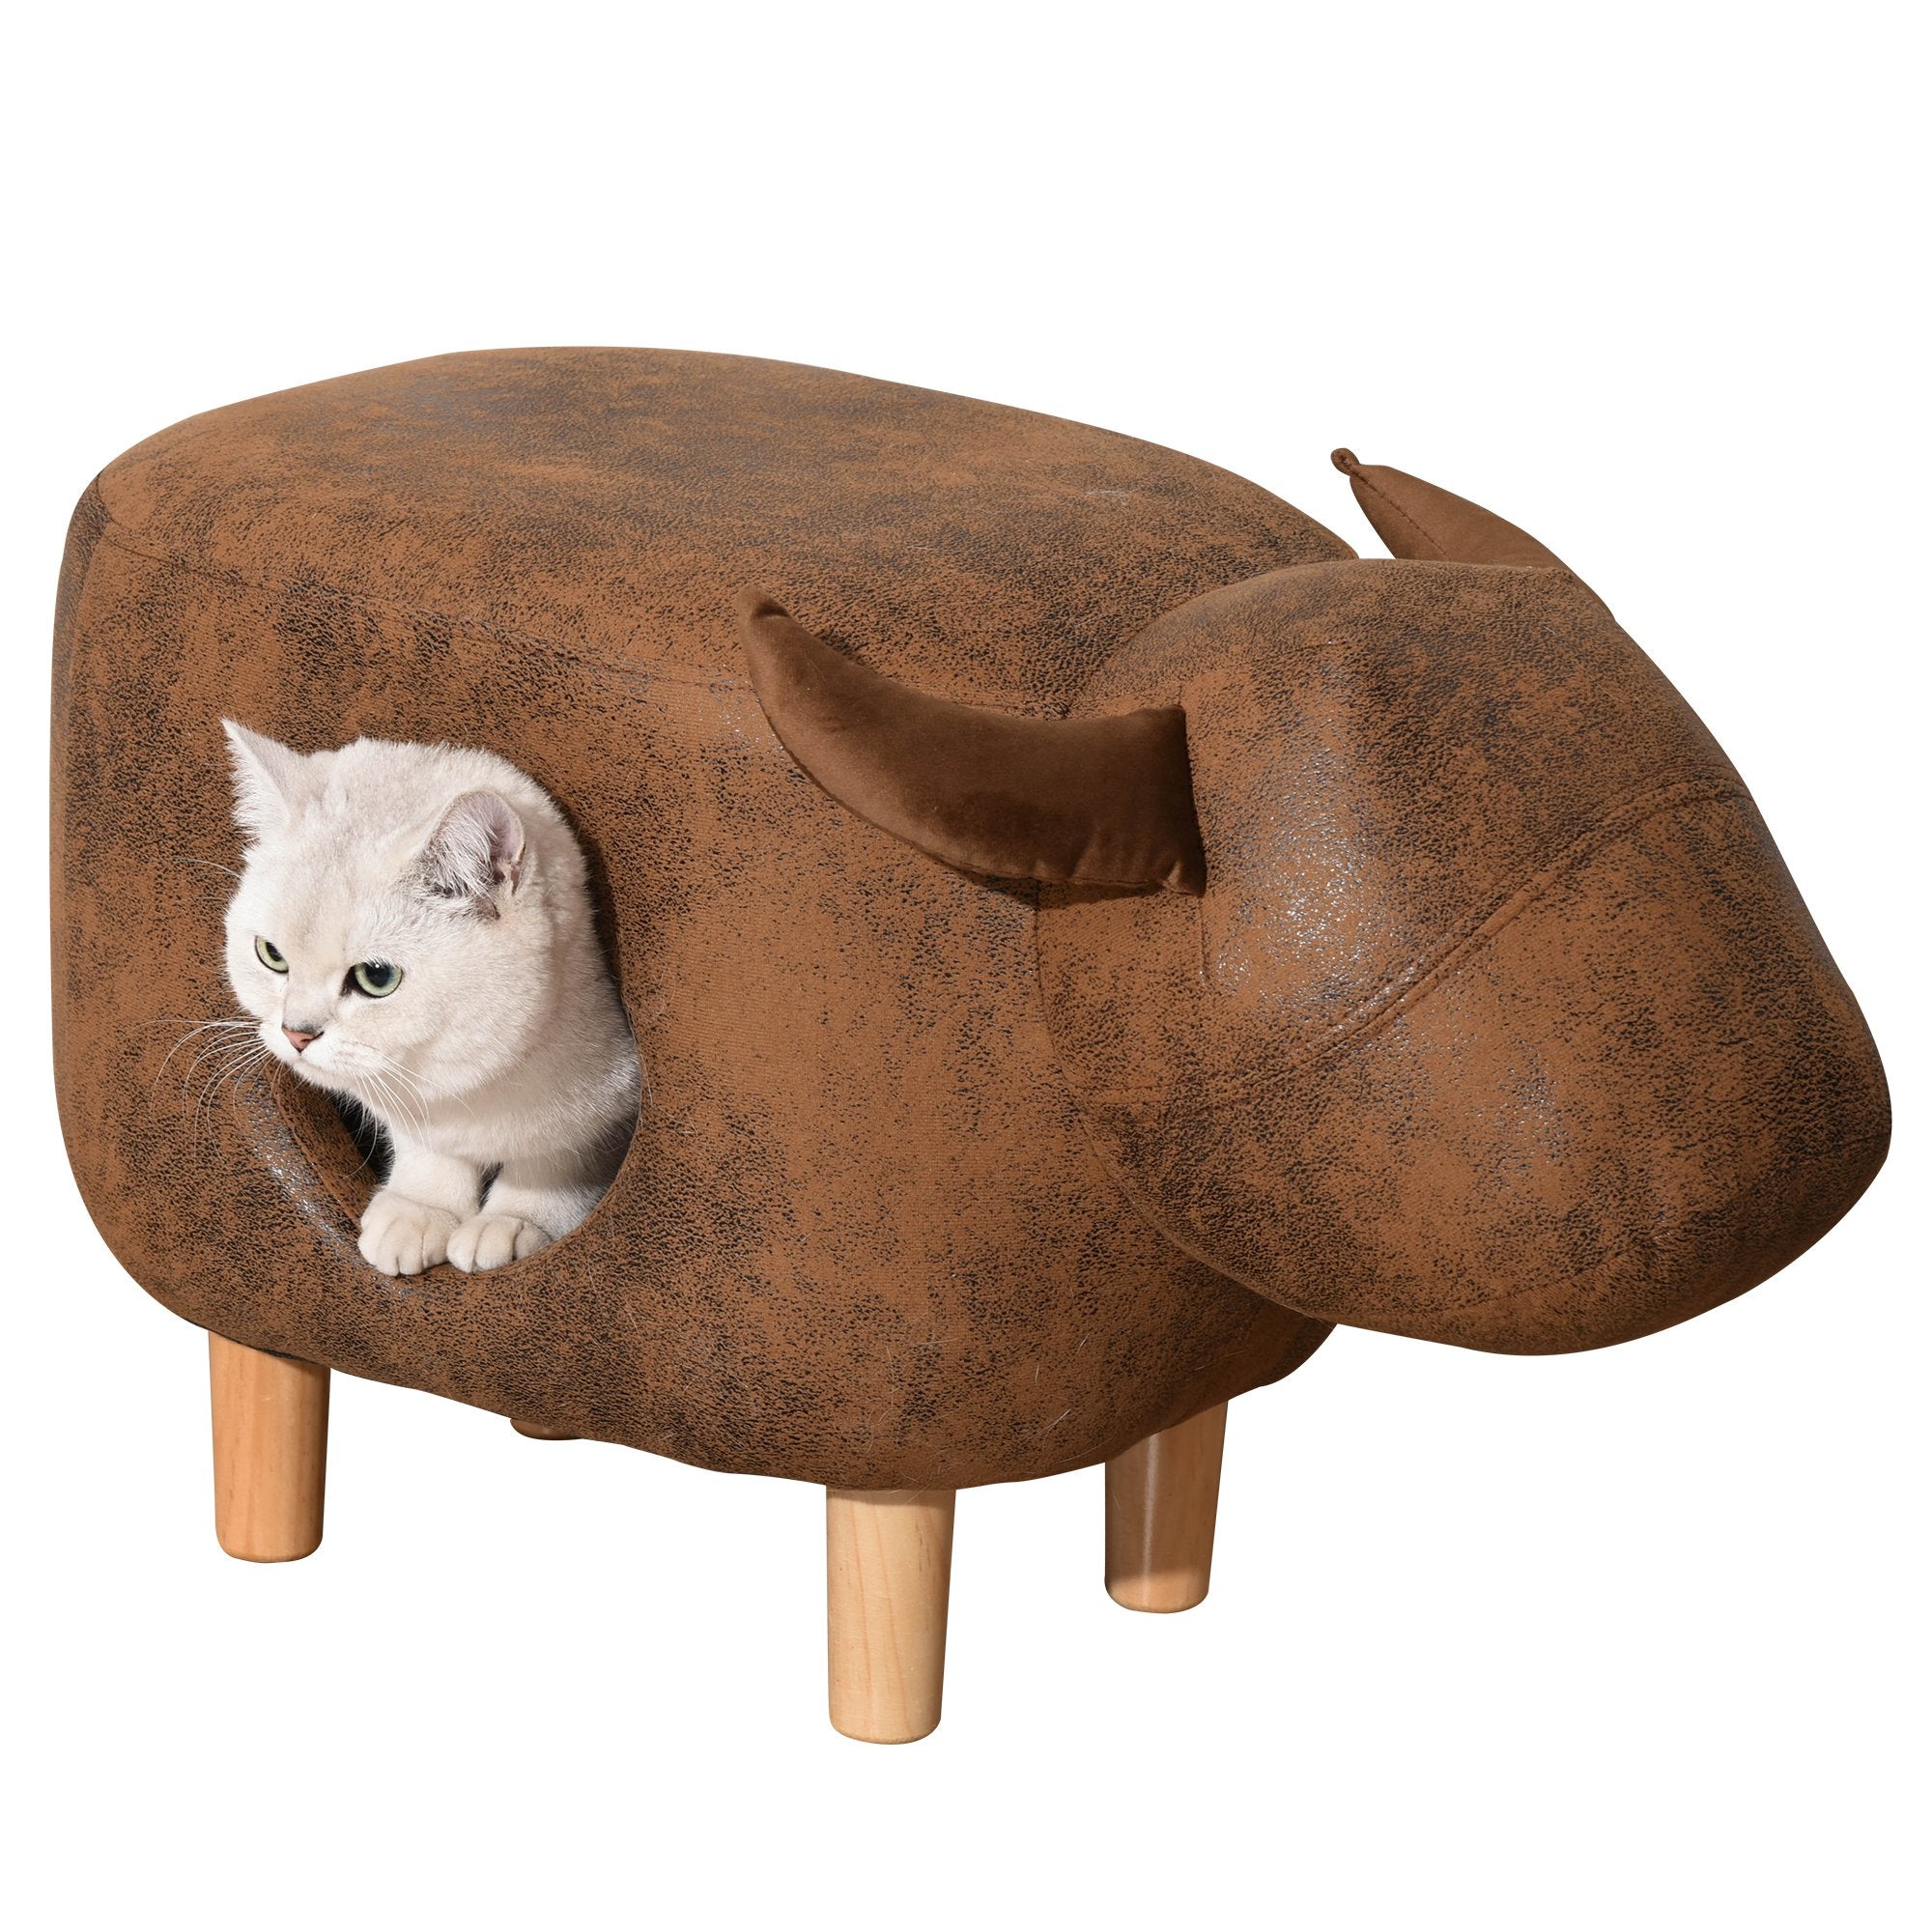 Pet House Ottoman Cat Bed Footstools Indoor Condo with Cushion, Brown